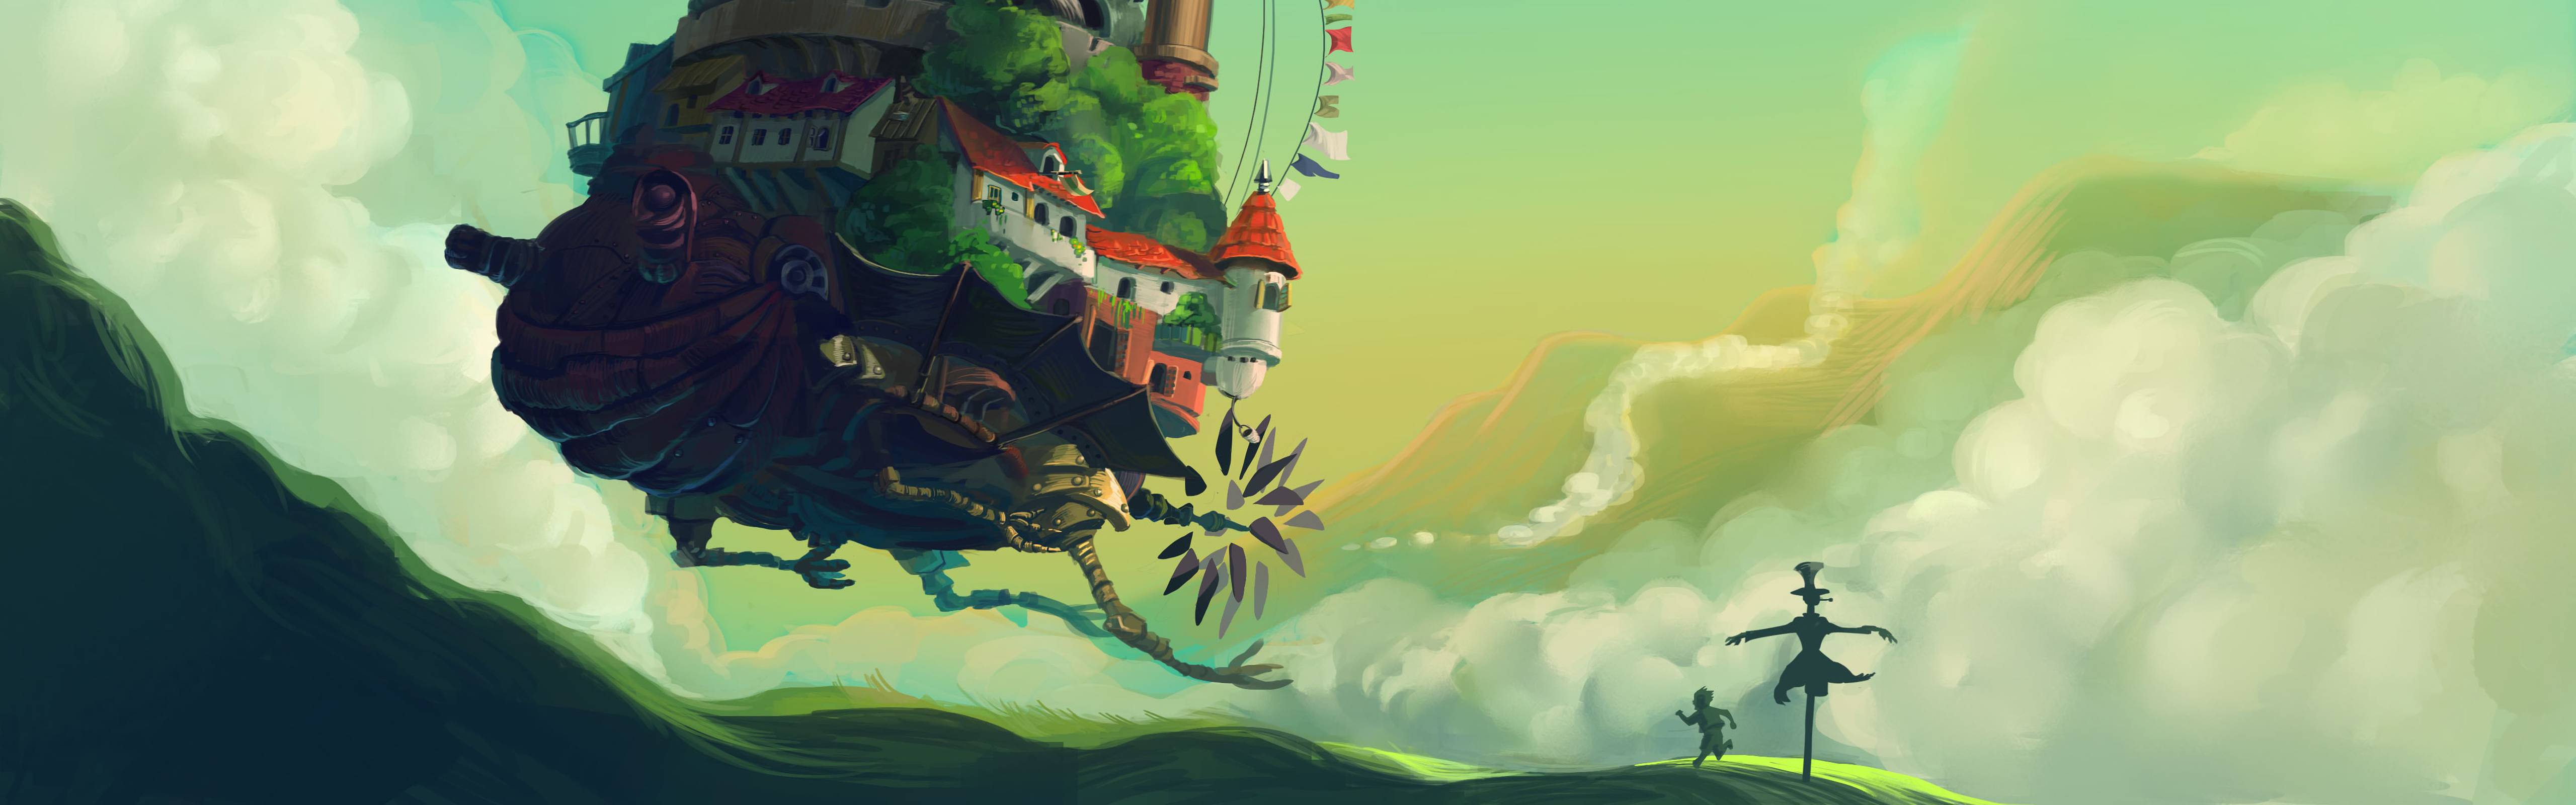 Howl's Moving Castle [5120x1600]